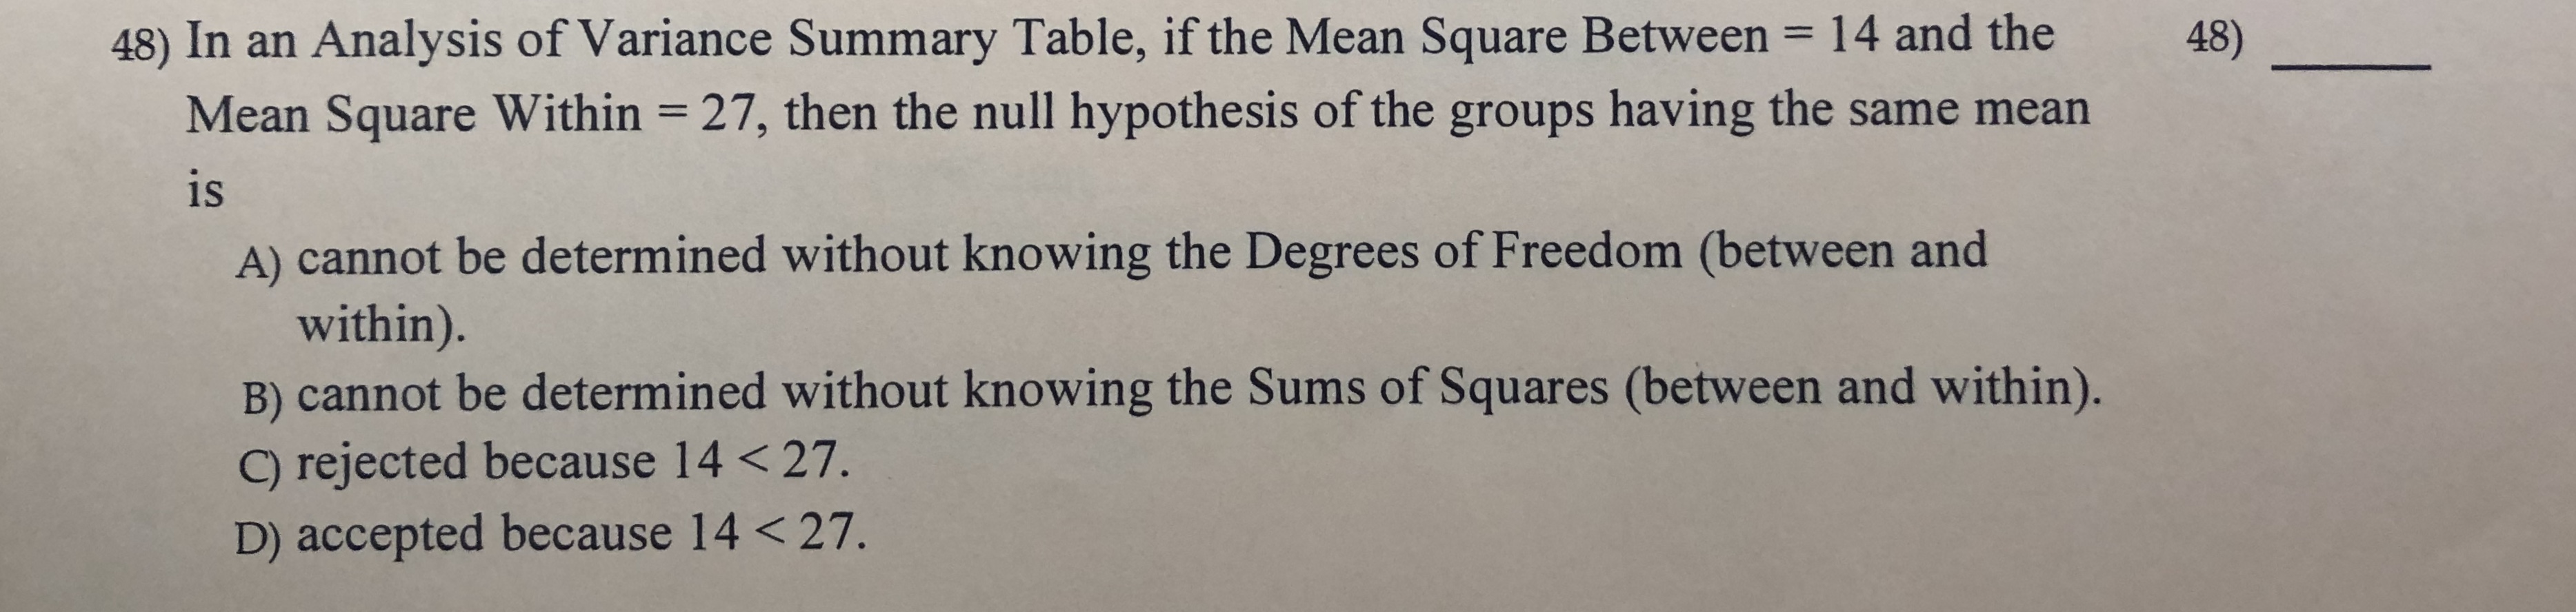 48) In an Analysis of Variance Summary Table, if the Mean Square Between 14 and the
Mean Square Within 27, then the null hypothesis of the groups having the same mean
48)
1
is
A) cannot be determined without knowing the Degrees of Freedom (between and
within).
B) cannot be determined without knowing the Sums of Squares (between and within).
C) rejected because 14 < 27.
D) accepted because 14 < 27.
